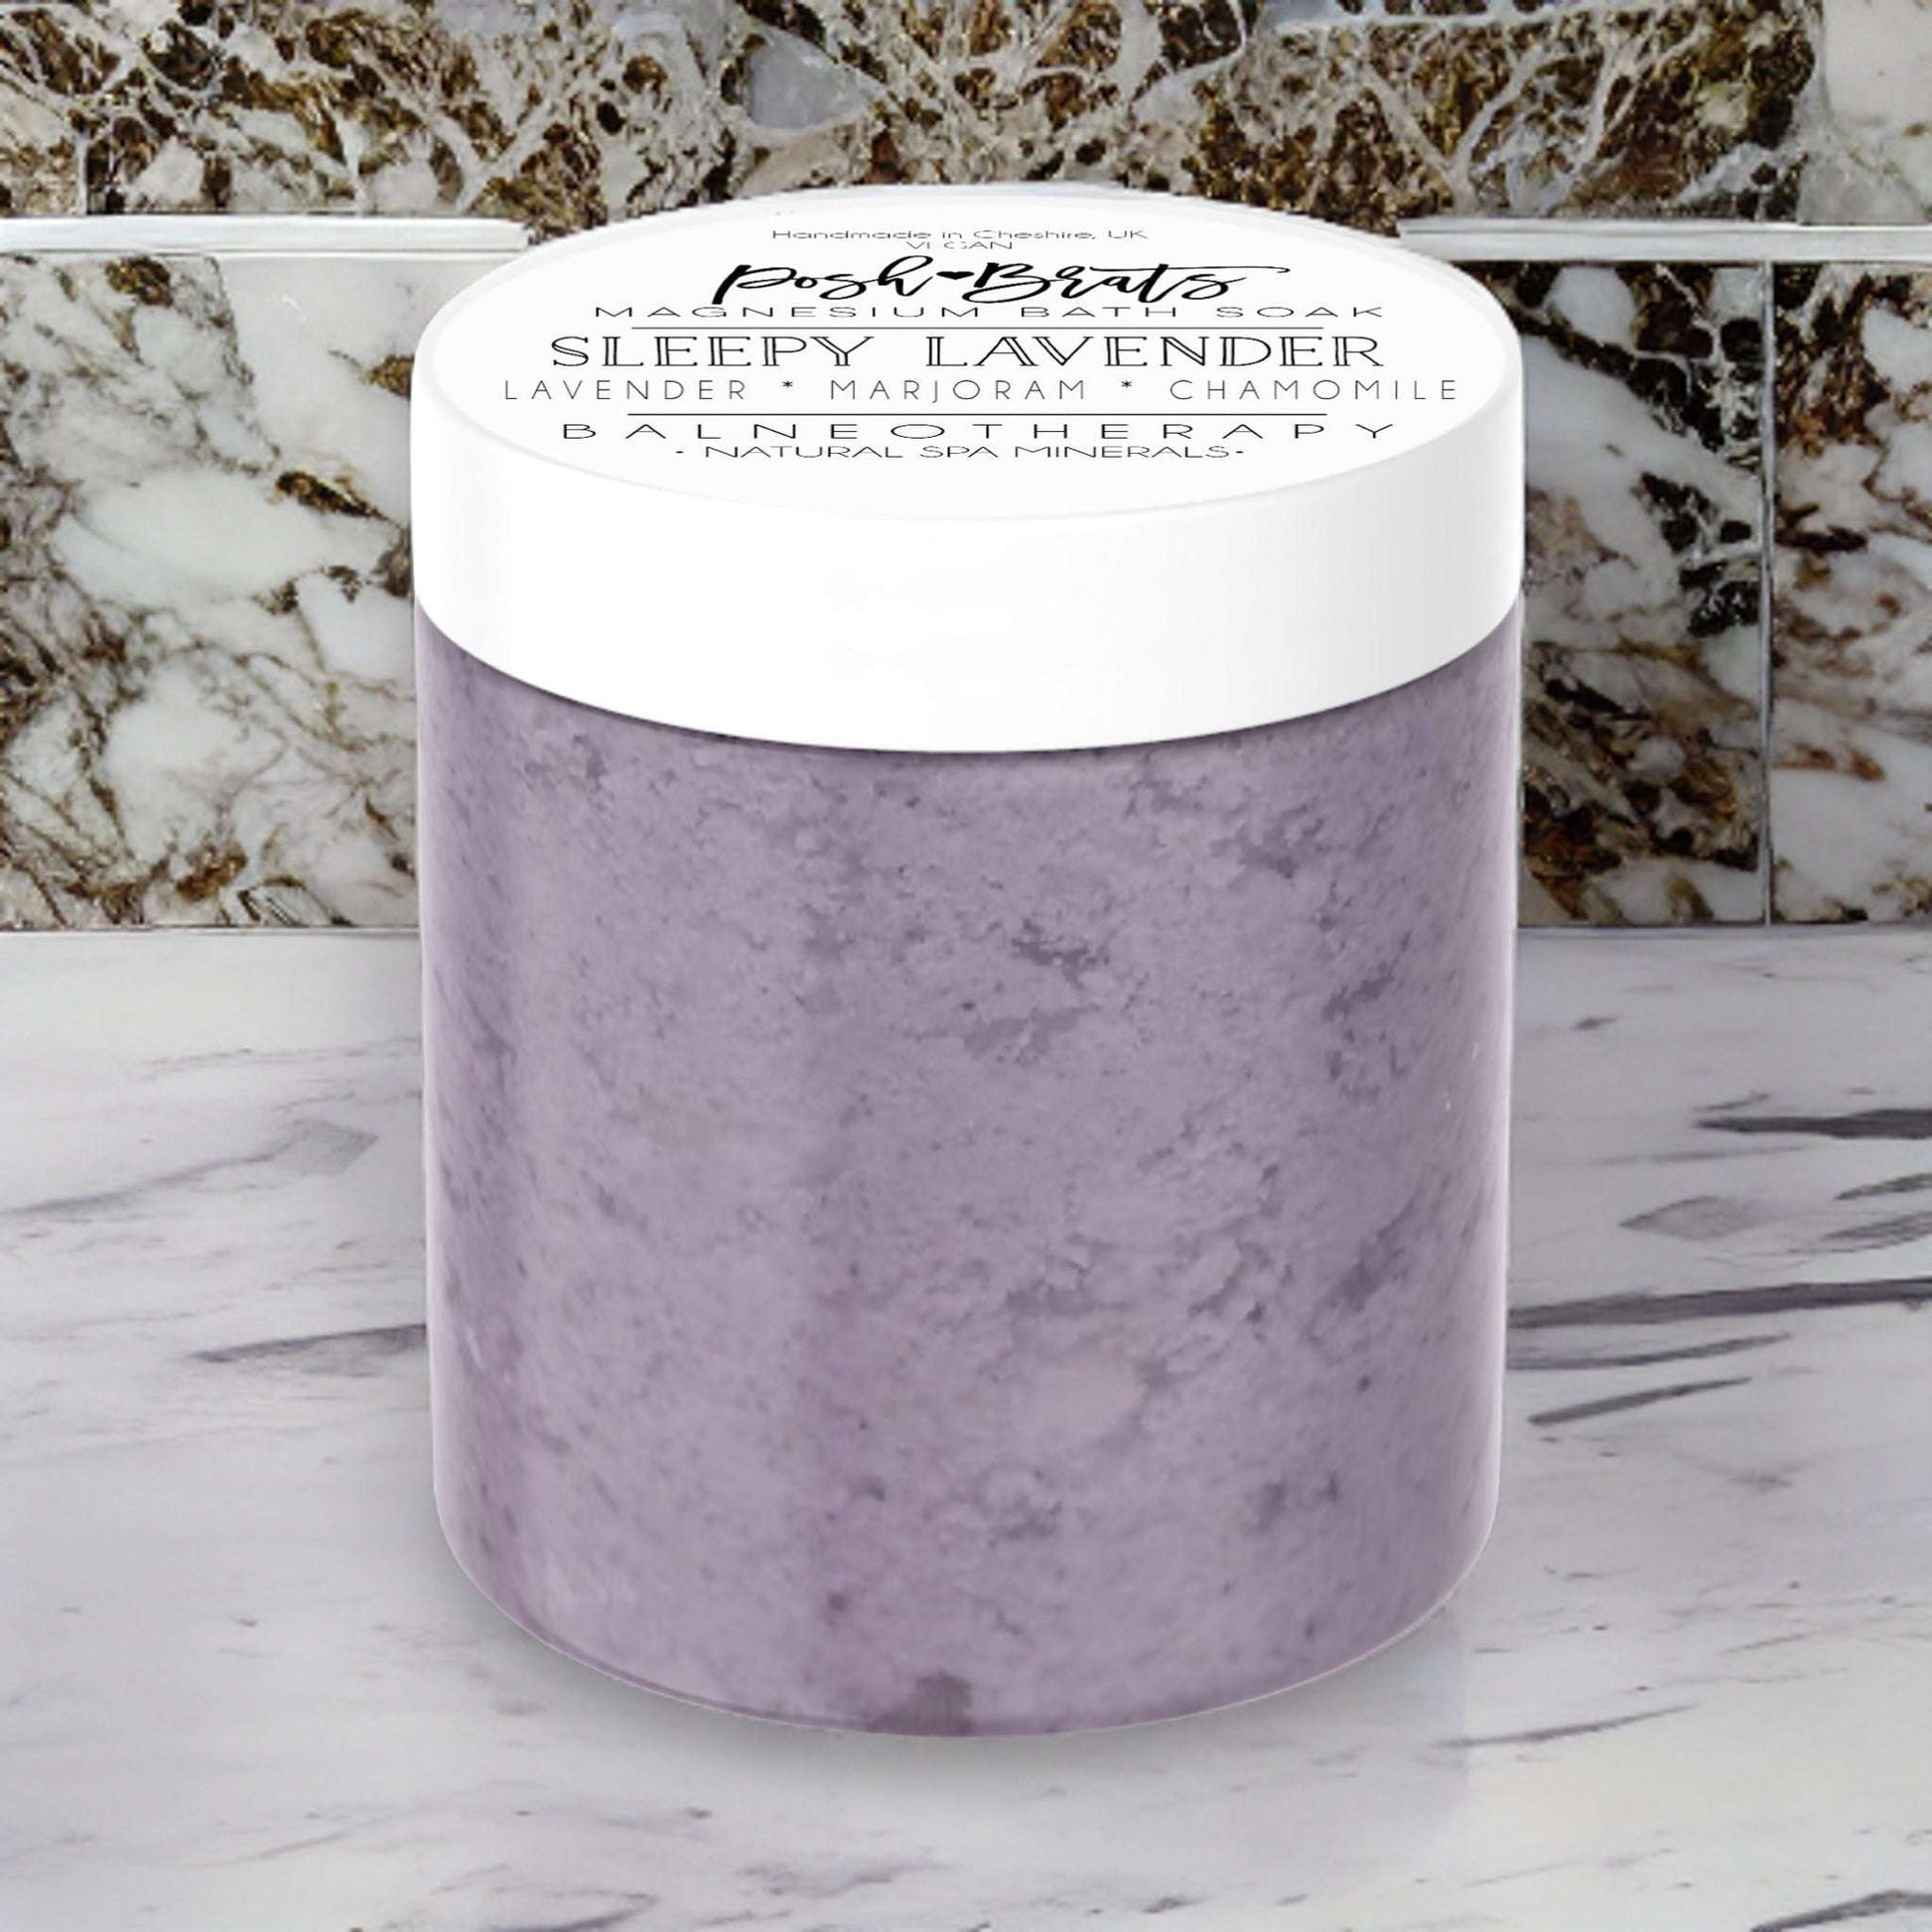 Unwind with our Sleepy Lavender Bath Salt Soak. Packed with magnesium sea minerals, it's a true spa experience at home!